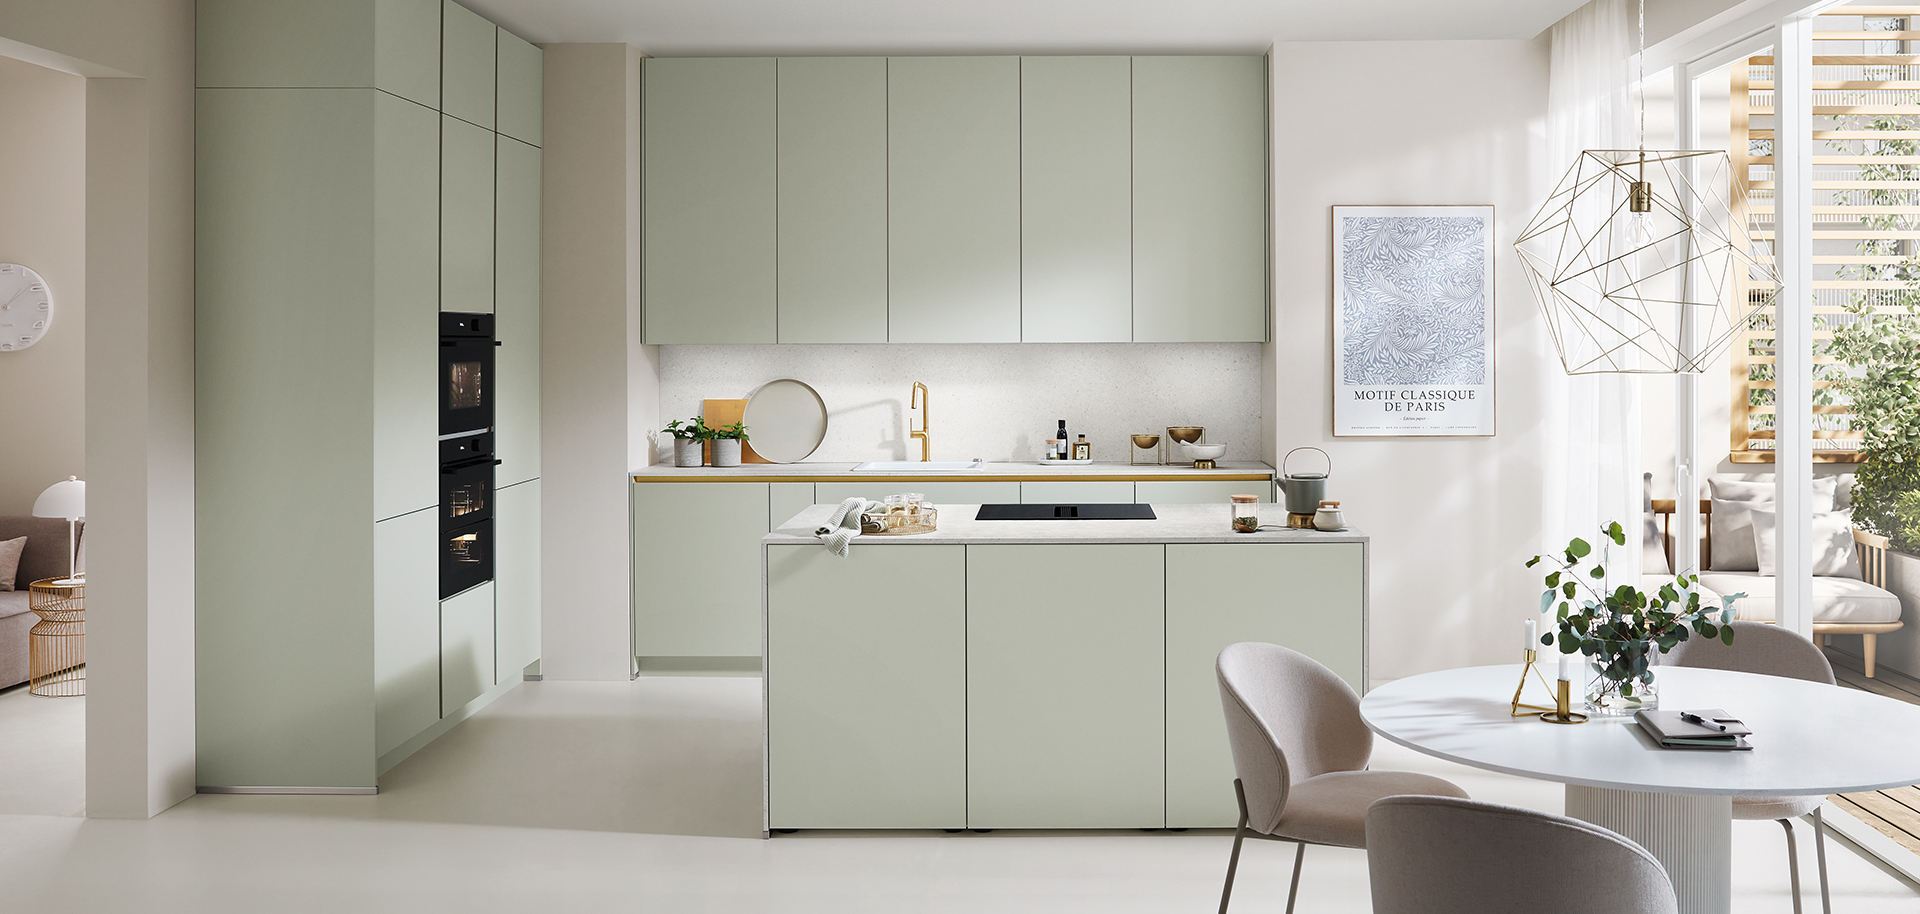 Modern kitchen with pastel green cabinetry, integrated appliances, and a cozy dining area showcasing minimalist design and a bright, airy atmosphere.